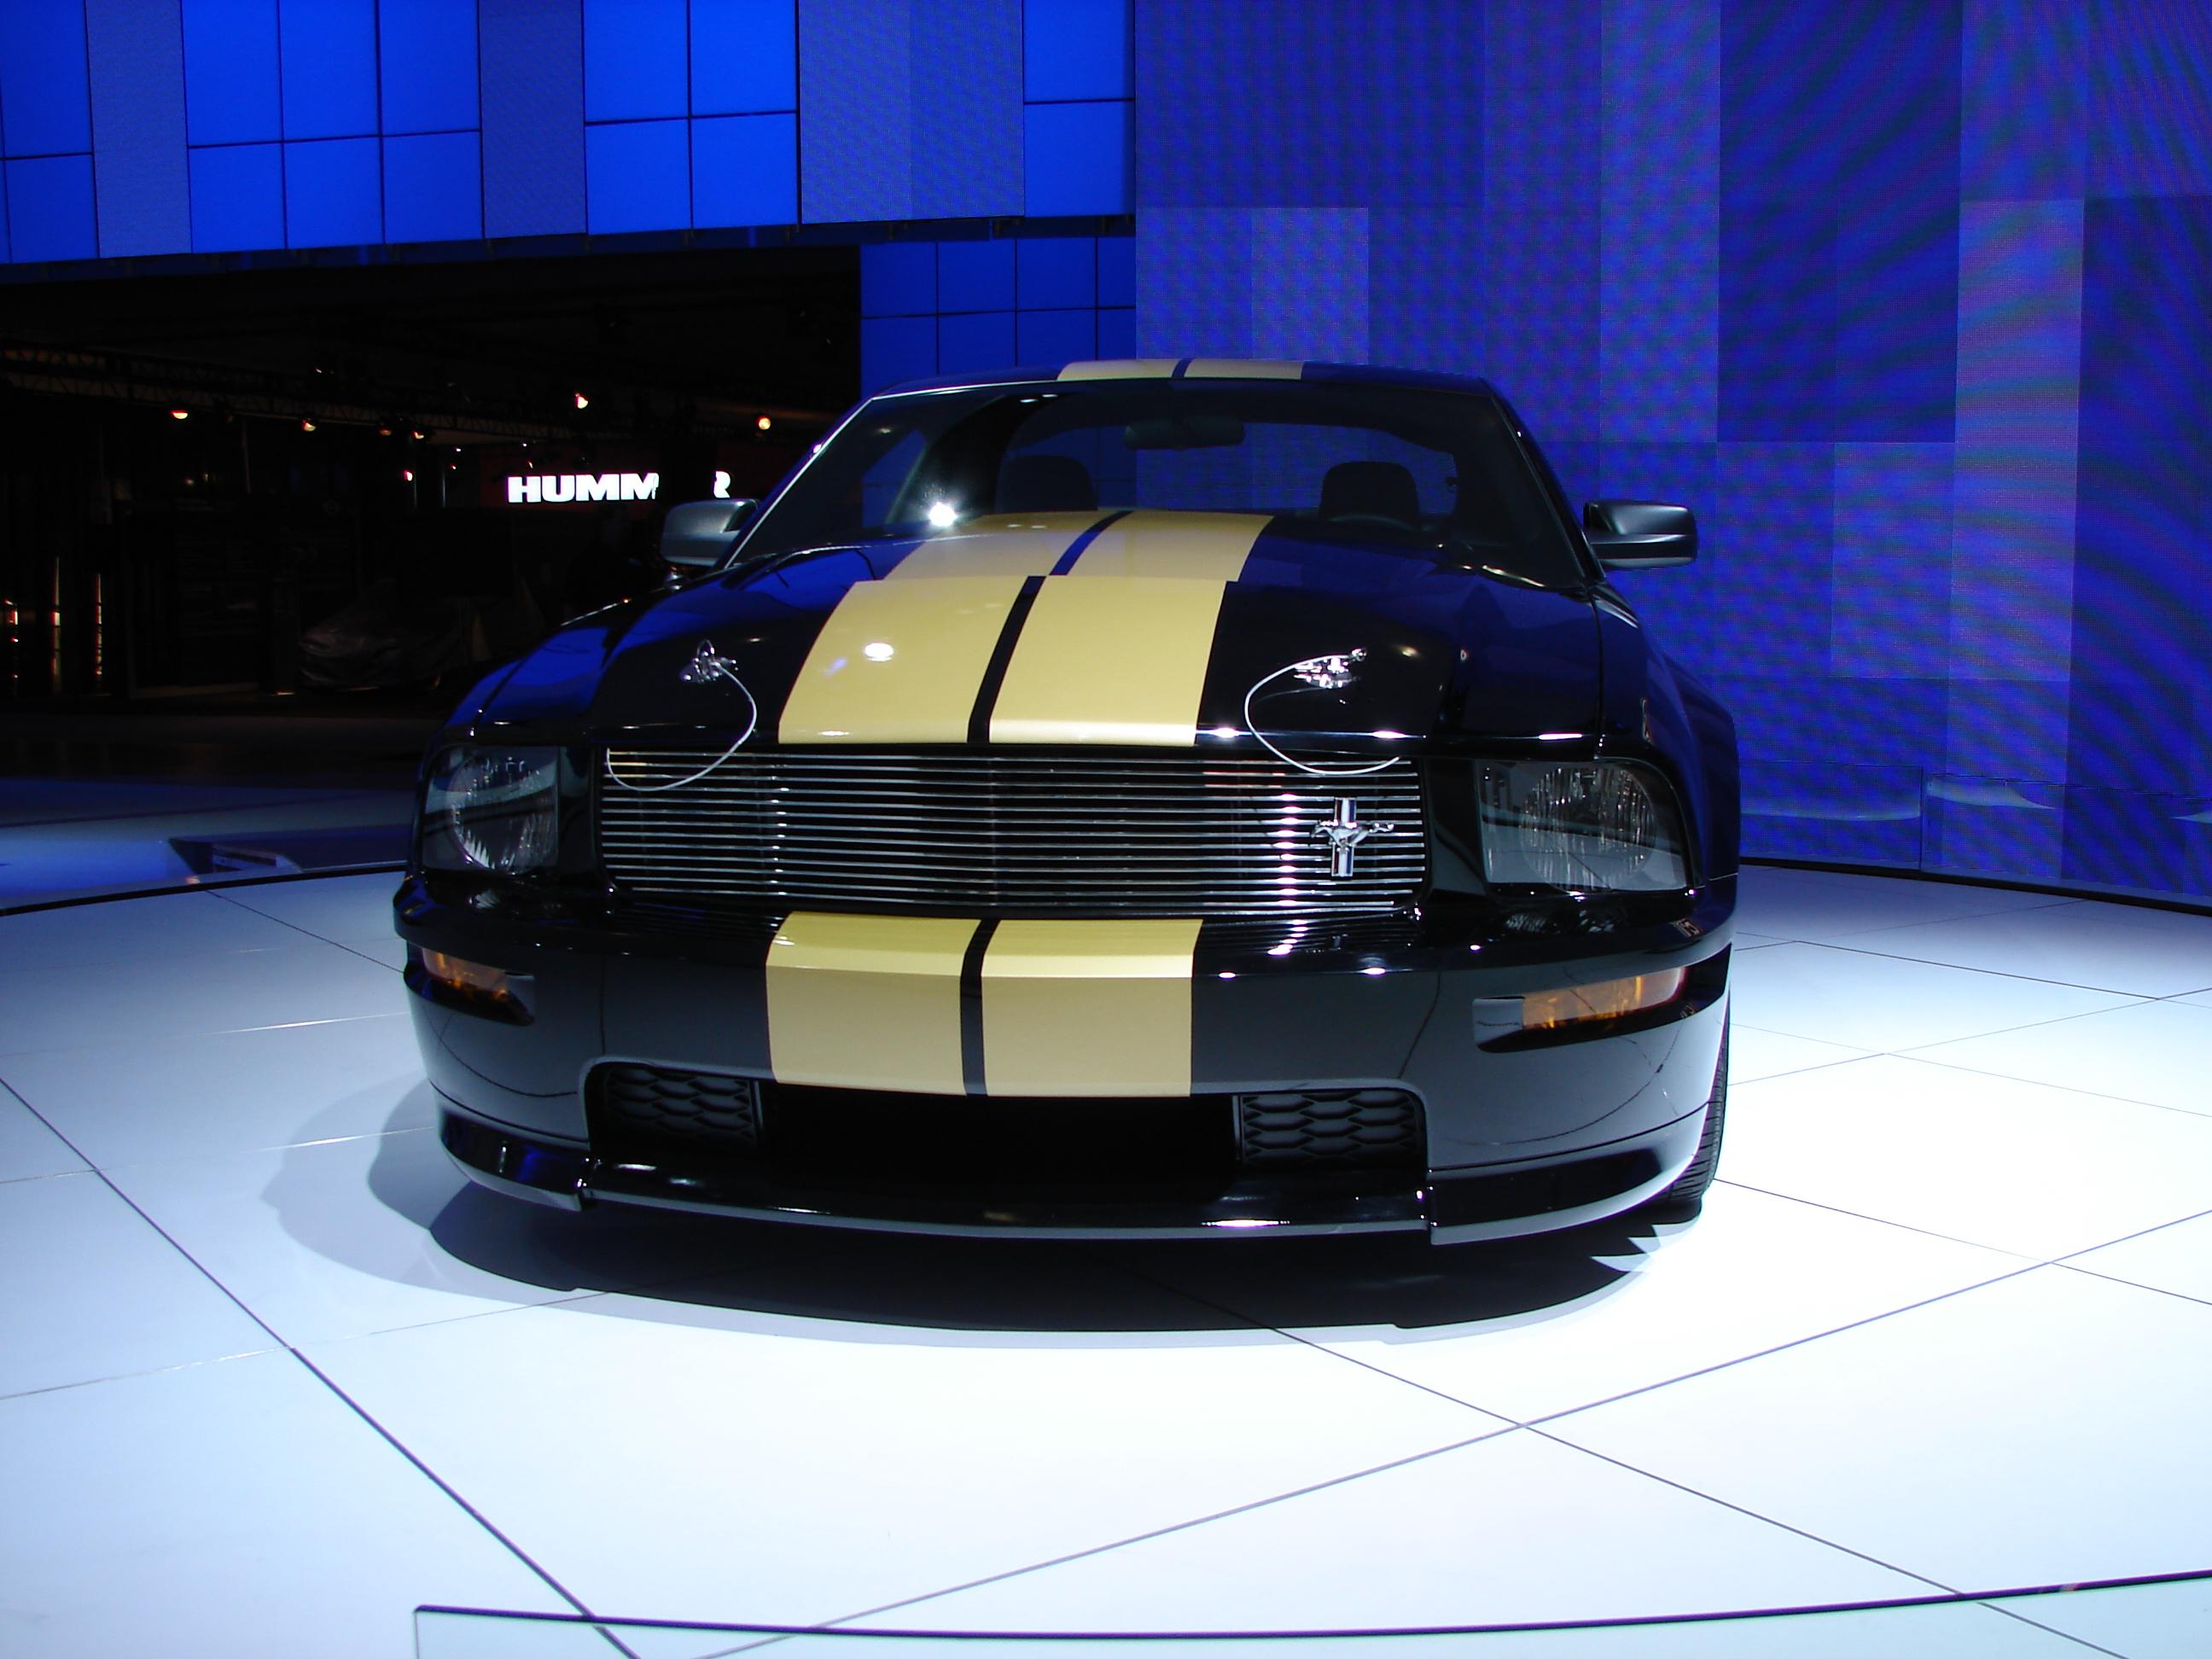 cars, muscle cars, vehicles, Ford Mustang, Shelby Mustang, black cars, Shelby GT500 - desktop wallpaper